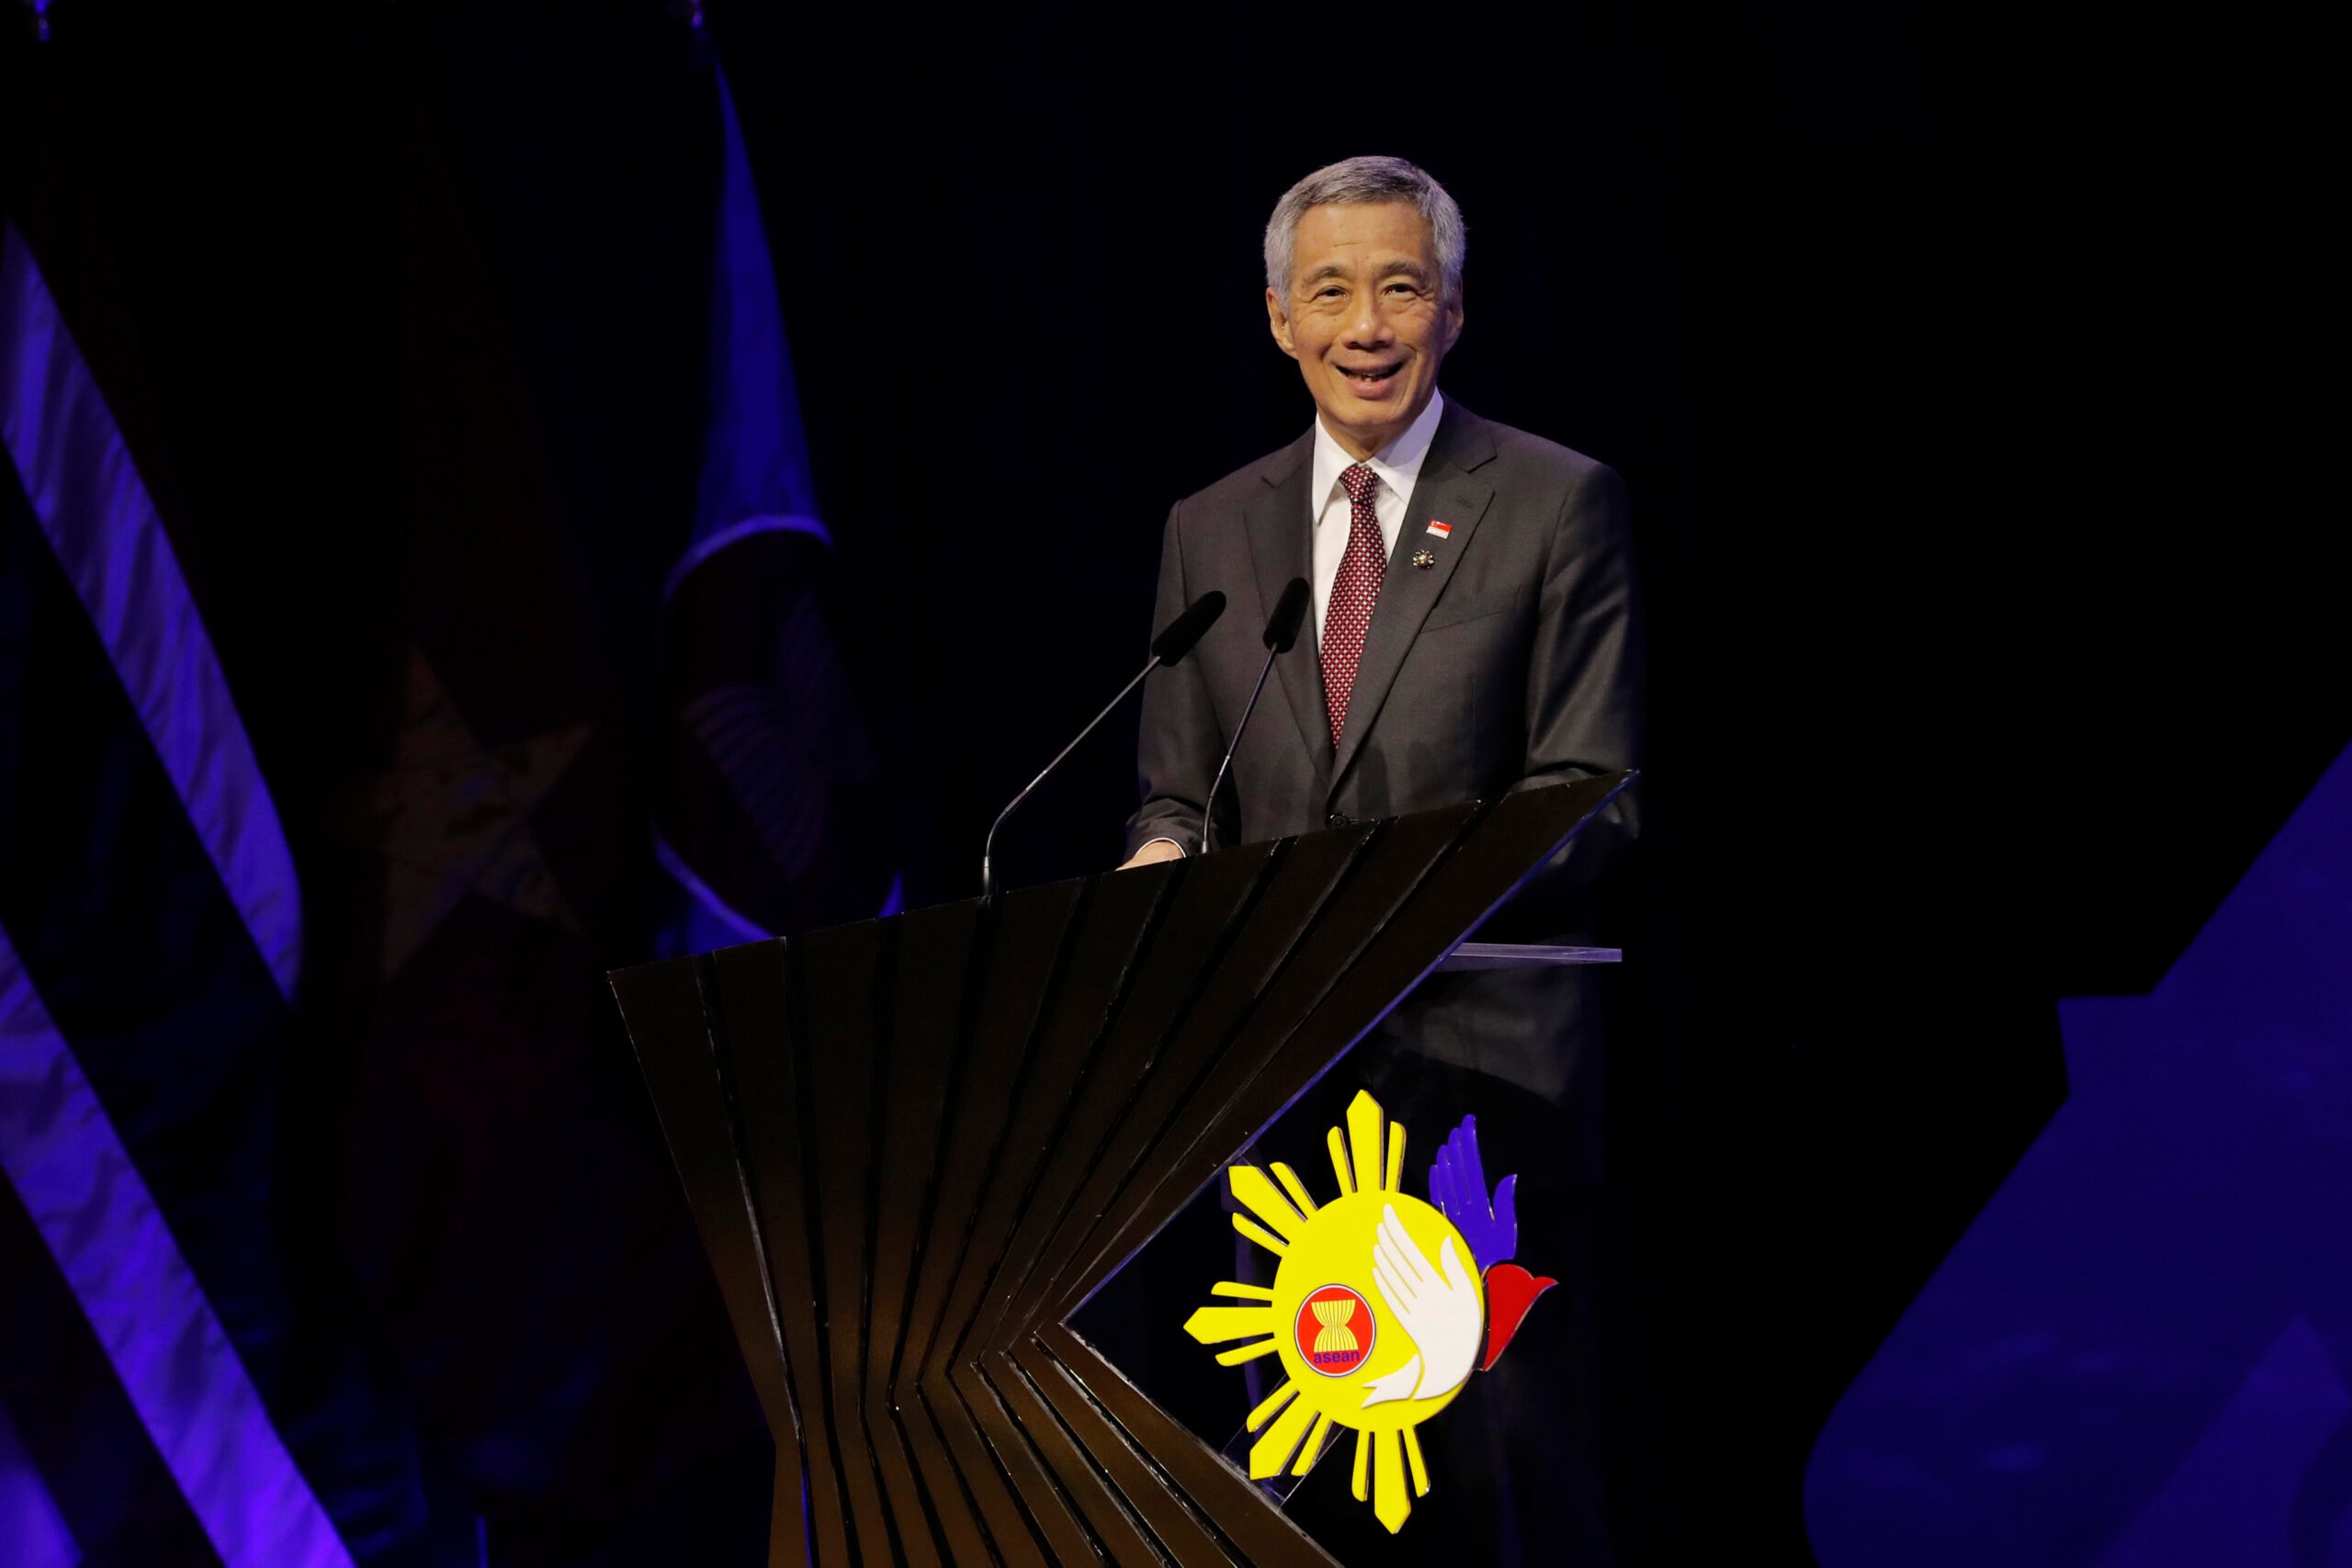 Singapore’s ASEAN 2018 chairmanship to focus on ‘resilience and innovation’